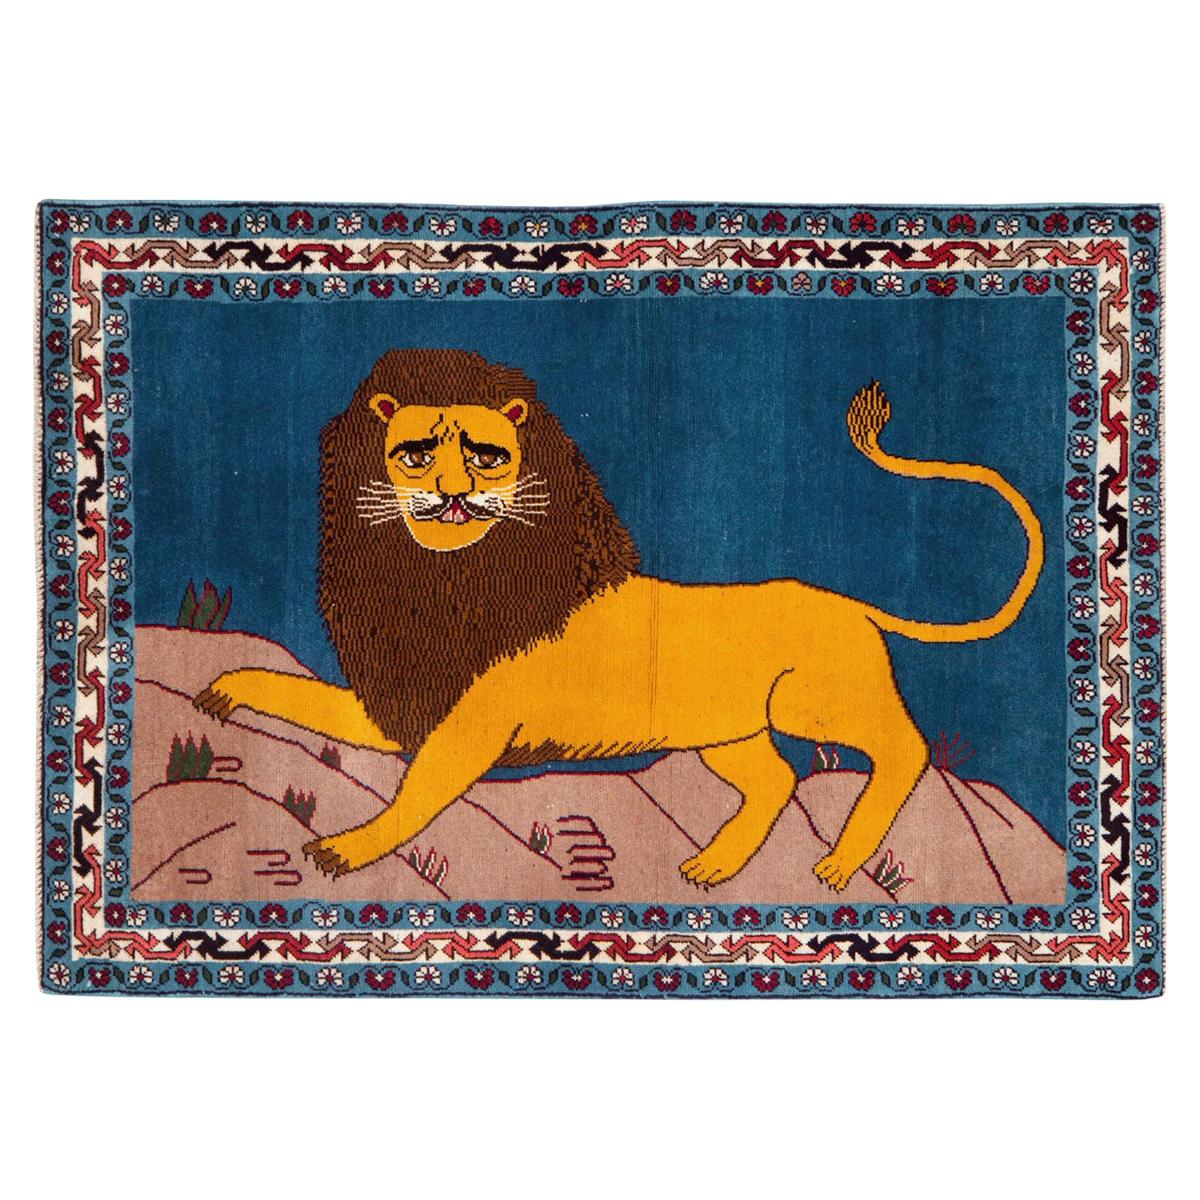 Contemporary Handmade Persian Shiraz Pictorial Lion Throw Rug in Yellow and Blue